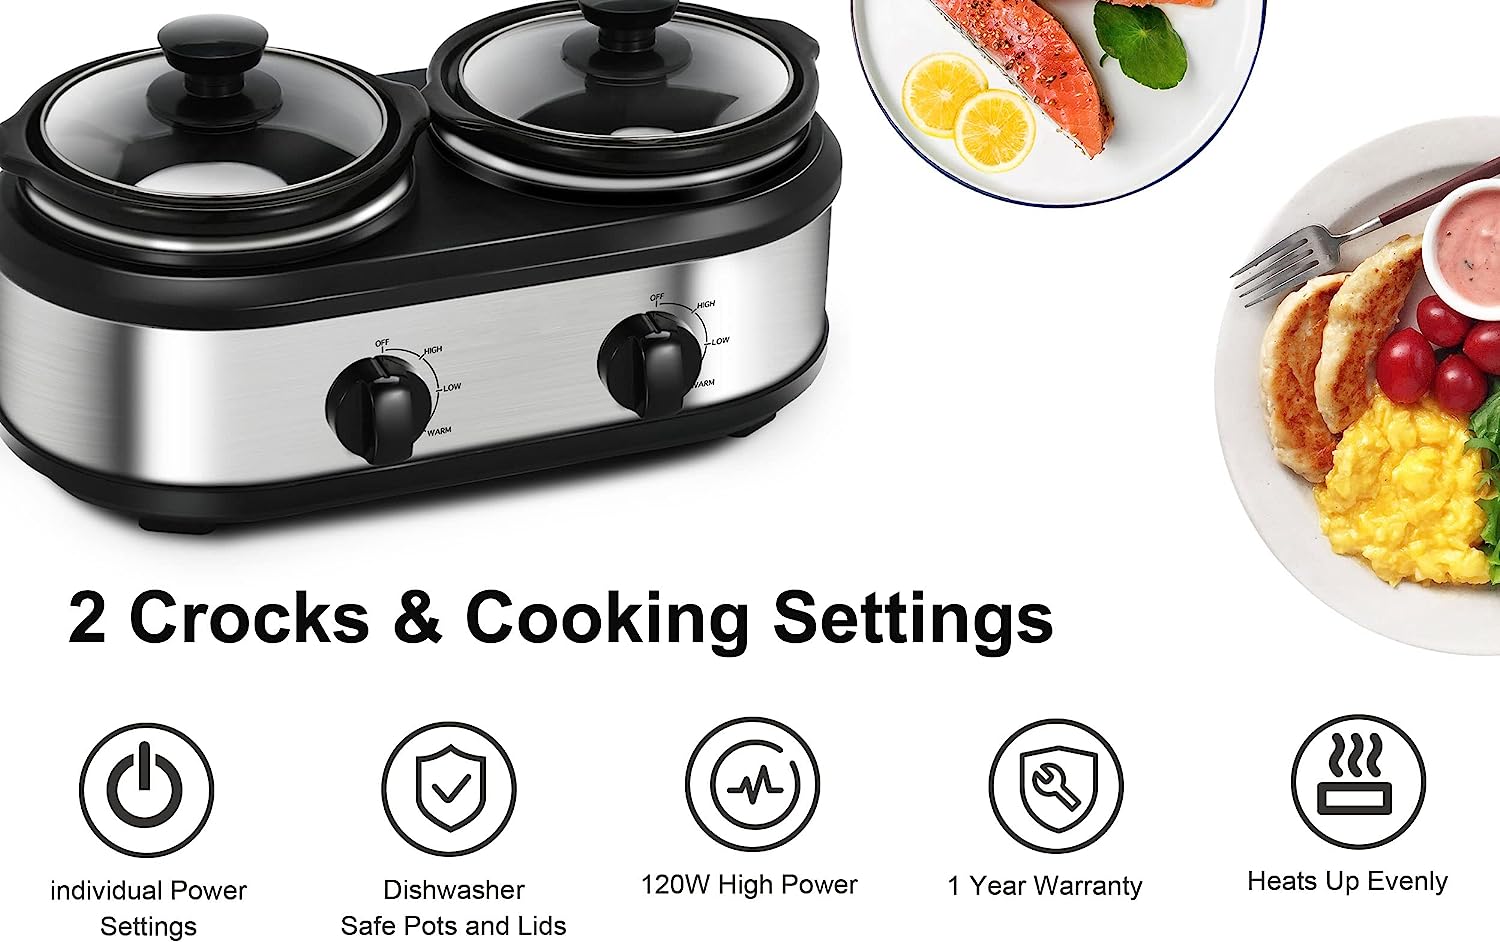 Slow Cooker, Dual and Triple Slow Cooker Buffet Server Multiple Pot Food  Warmer, Slow Cooker Buffet Food Warmer Adjustable Temp Lid Rests Stainless